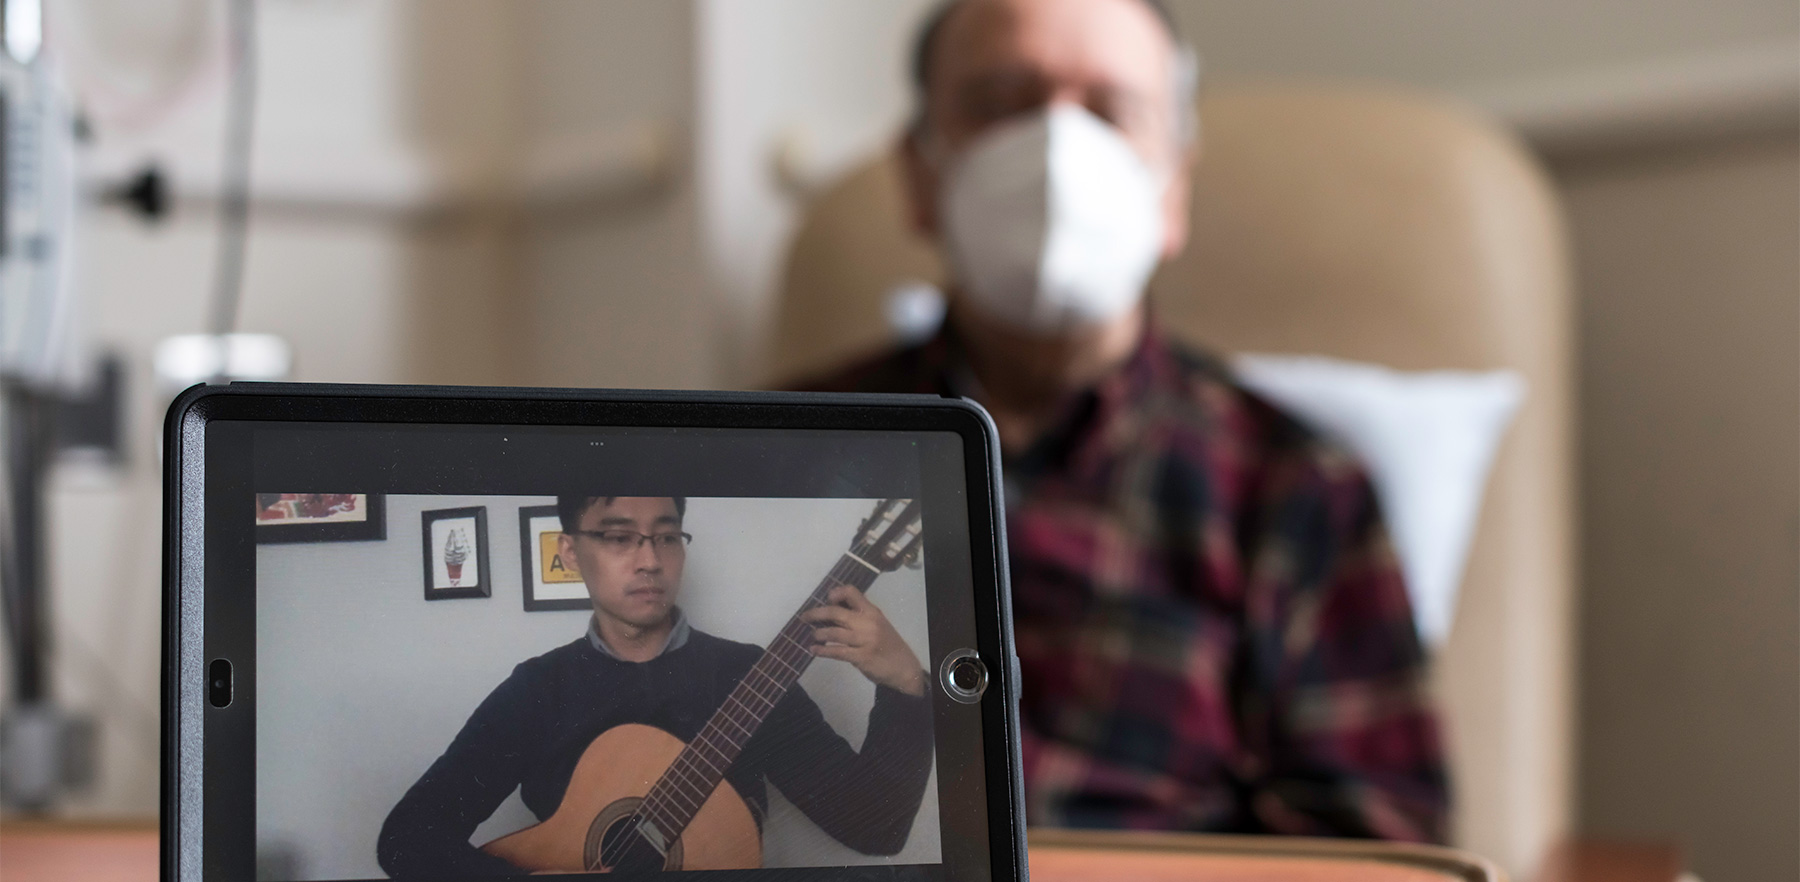 Man playing music on phone while patient watches